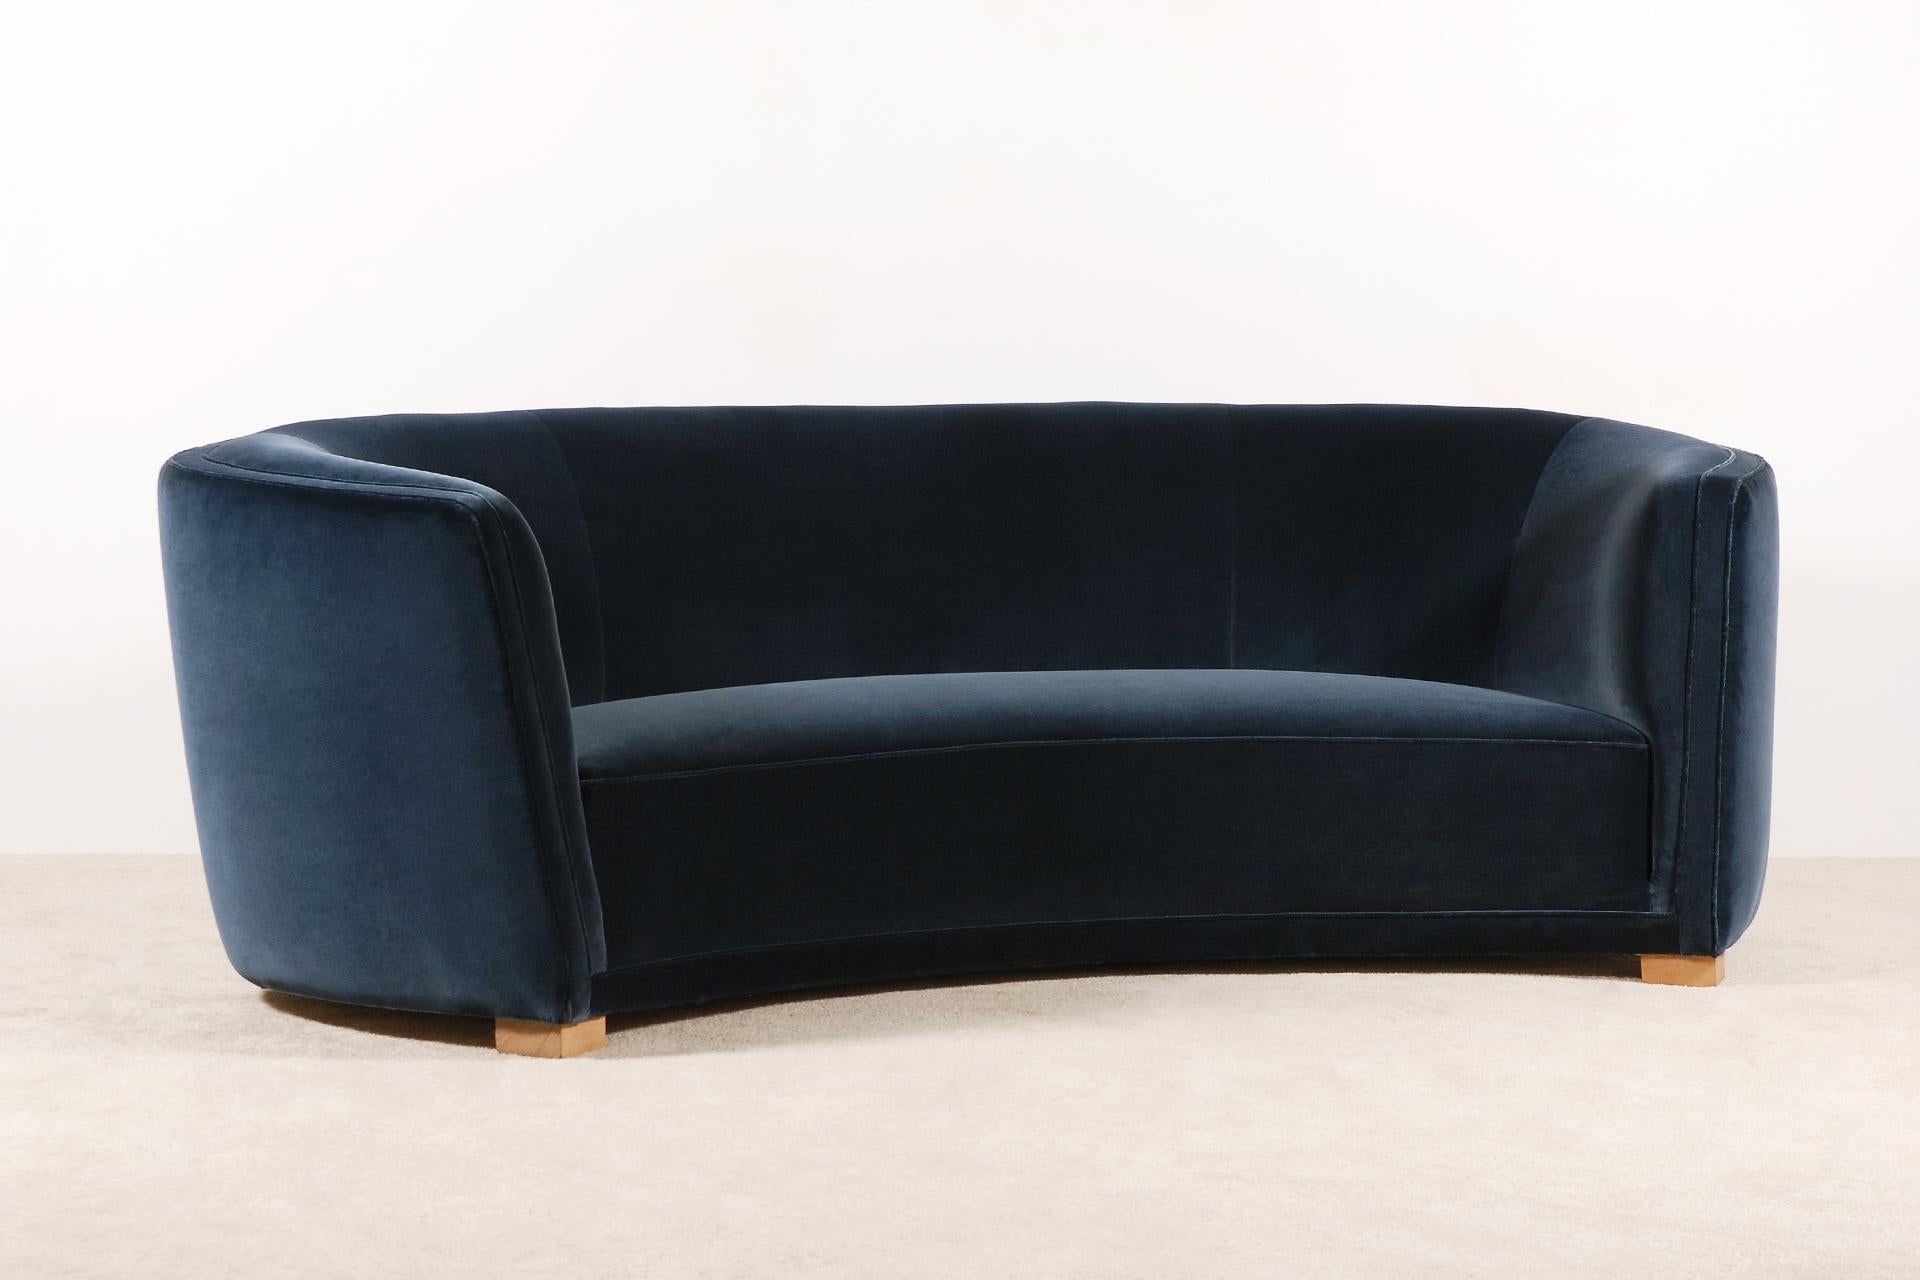 Mid-20th Century Gorgeous Large Three-Seat Danish Curved Sofa from 1930s